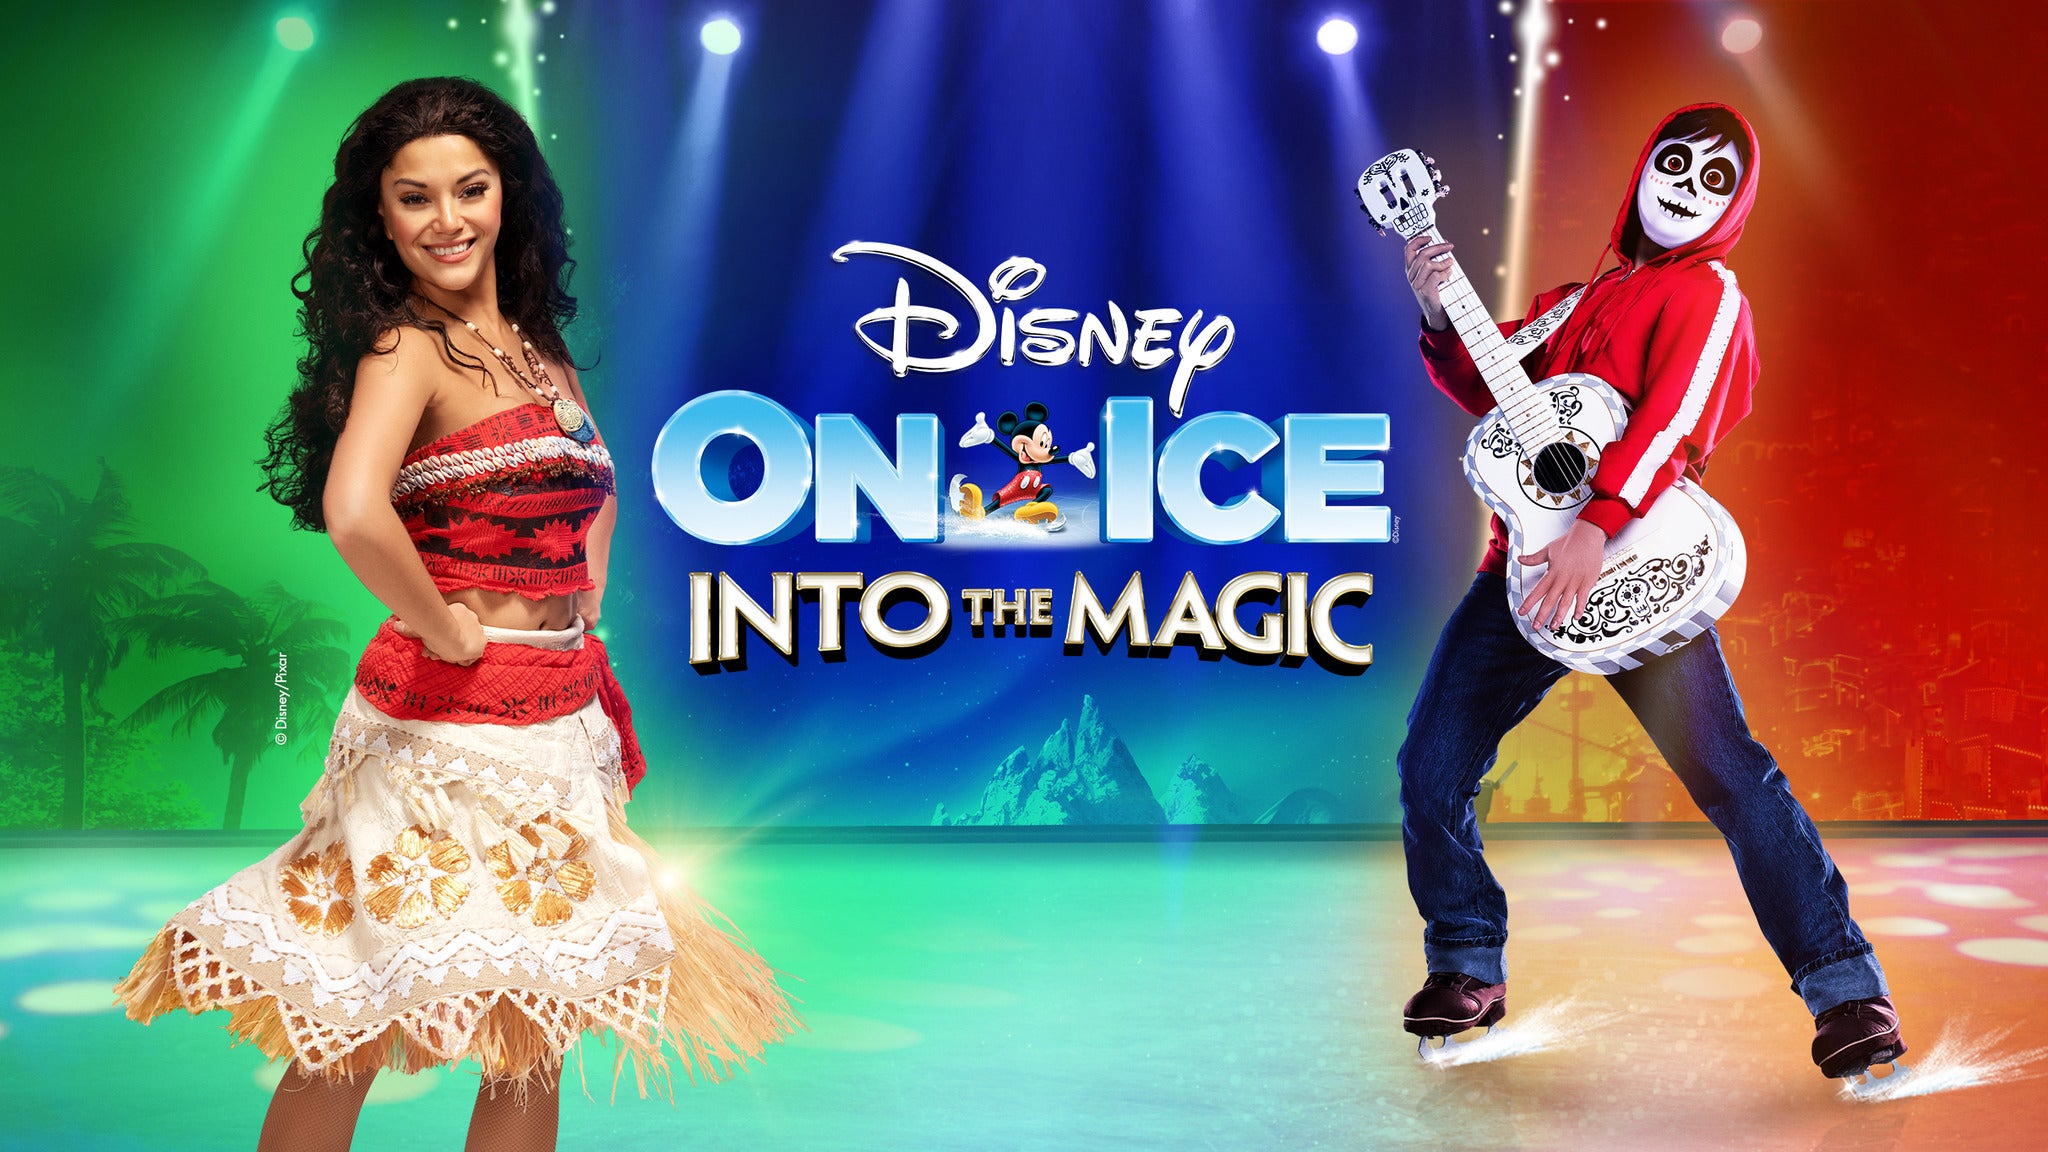 Disney On Ice presents Into the Magic pre-sale passcode for your tickets in Rochester